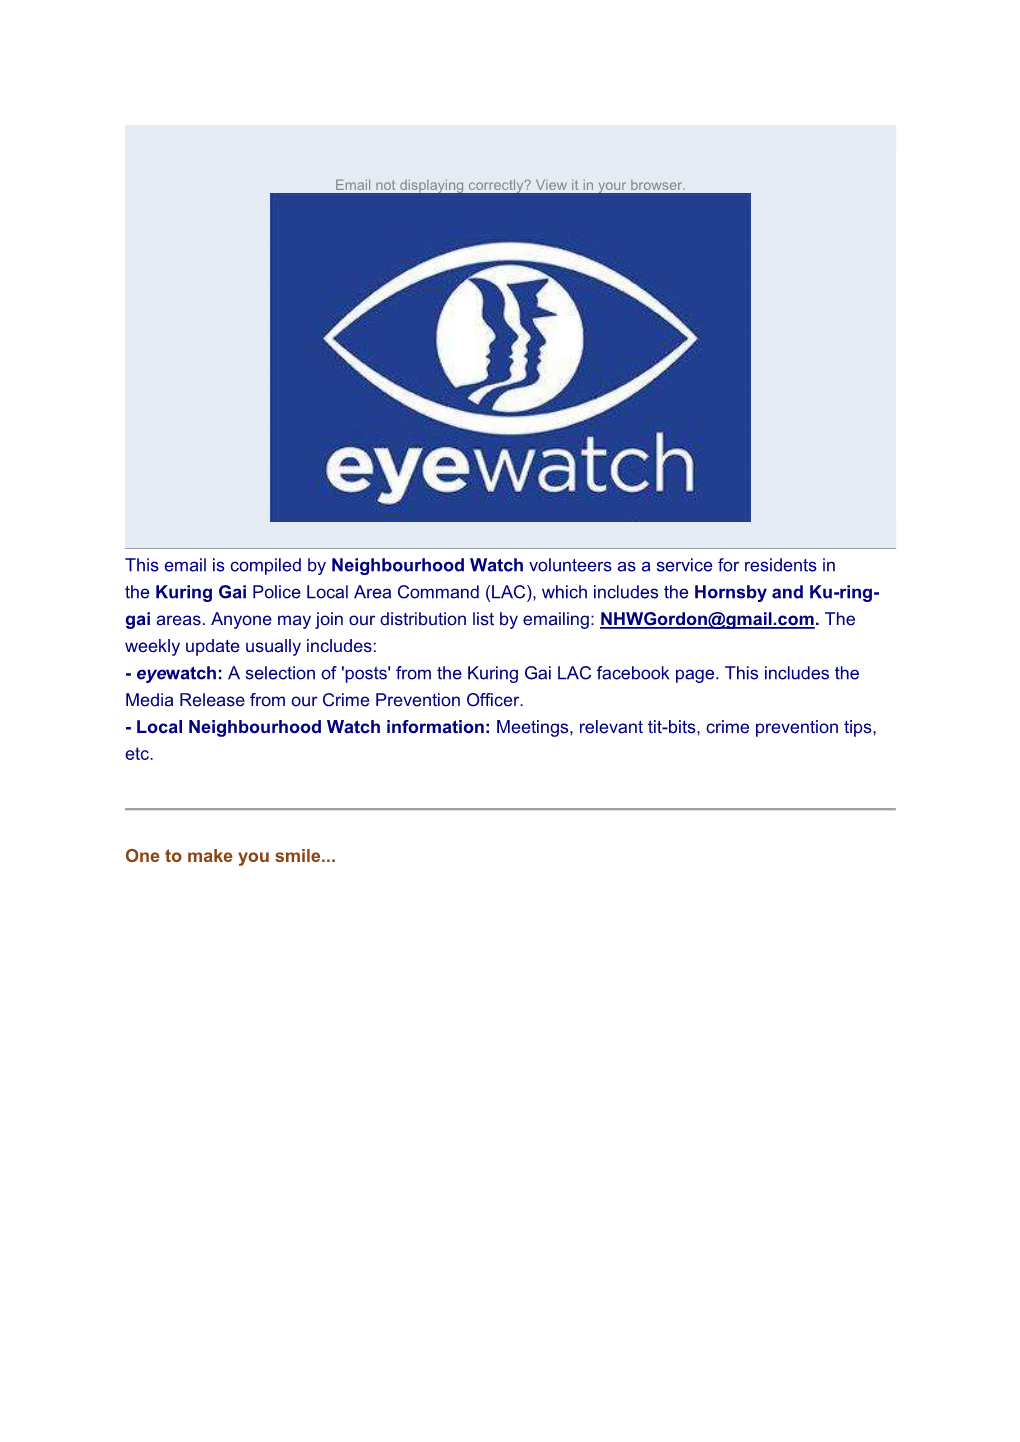 This Email Is Compiled by Neighbourhood Watch Volunteers